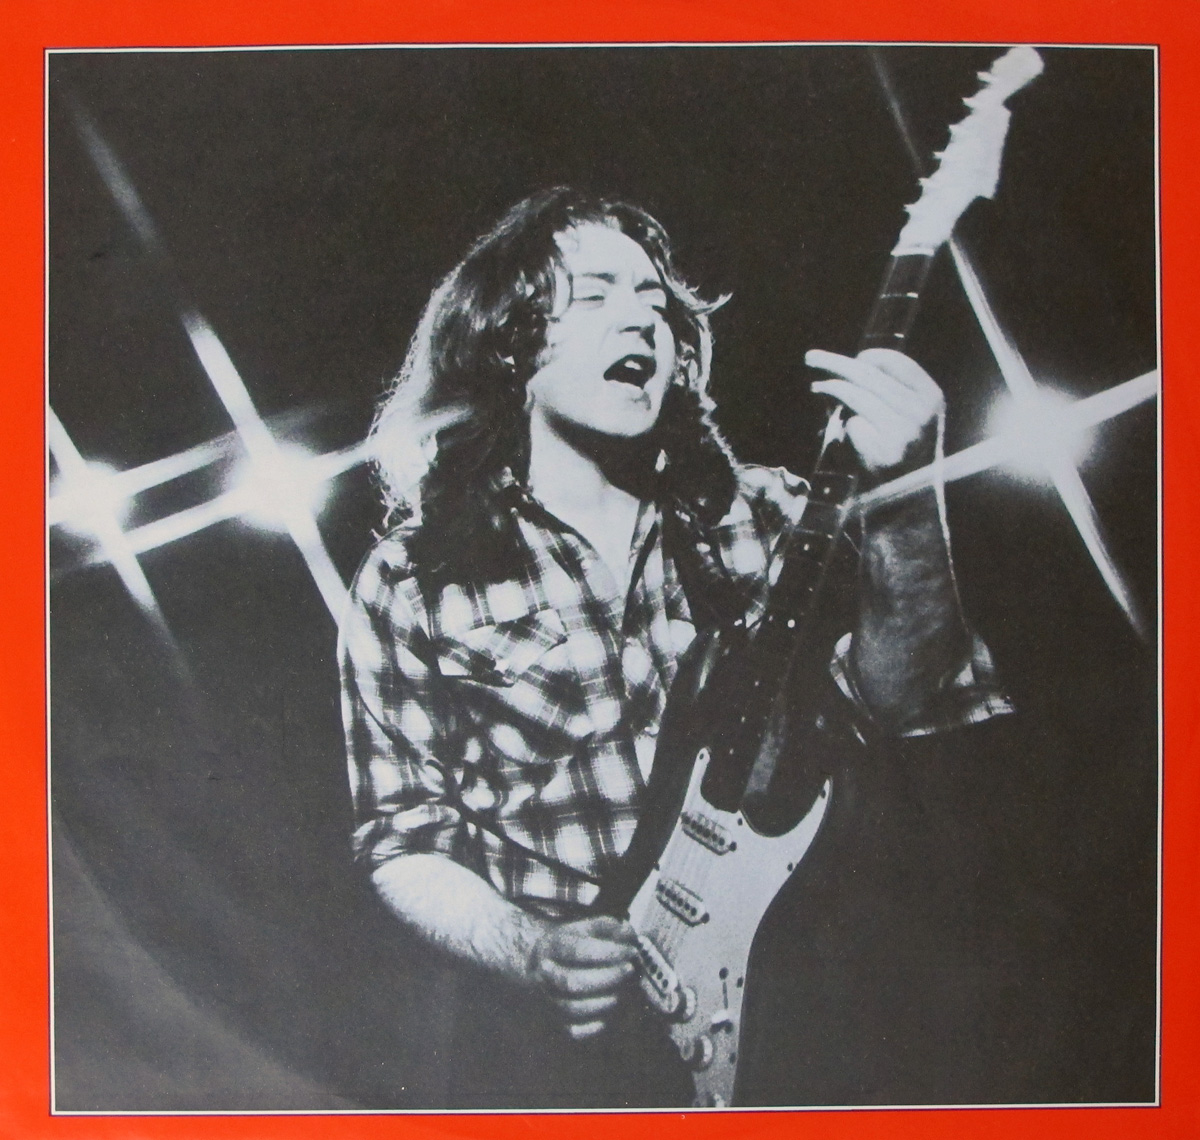 RORY GALLAGHER - Top Priority album's cover